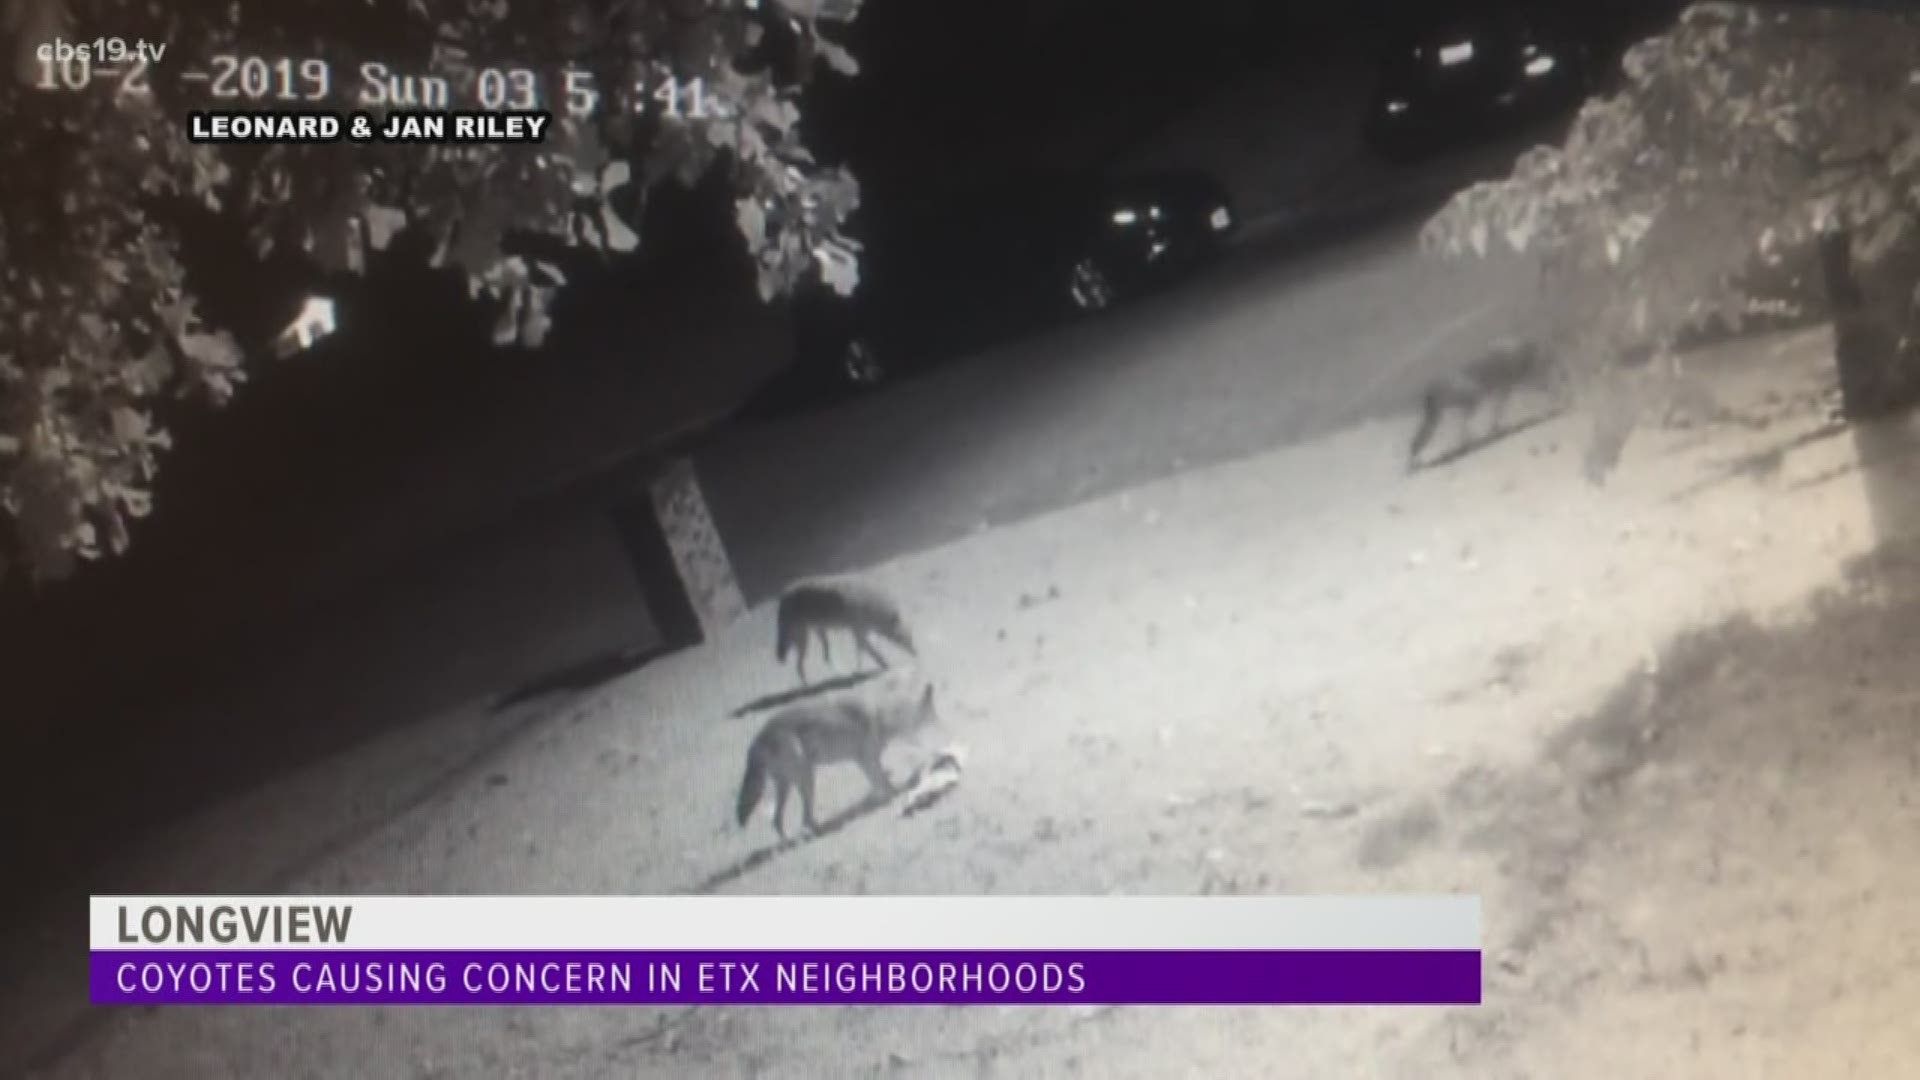 Many residents in the Wildwood subdivision in Longview are concerned over coyote sightings and encounters.